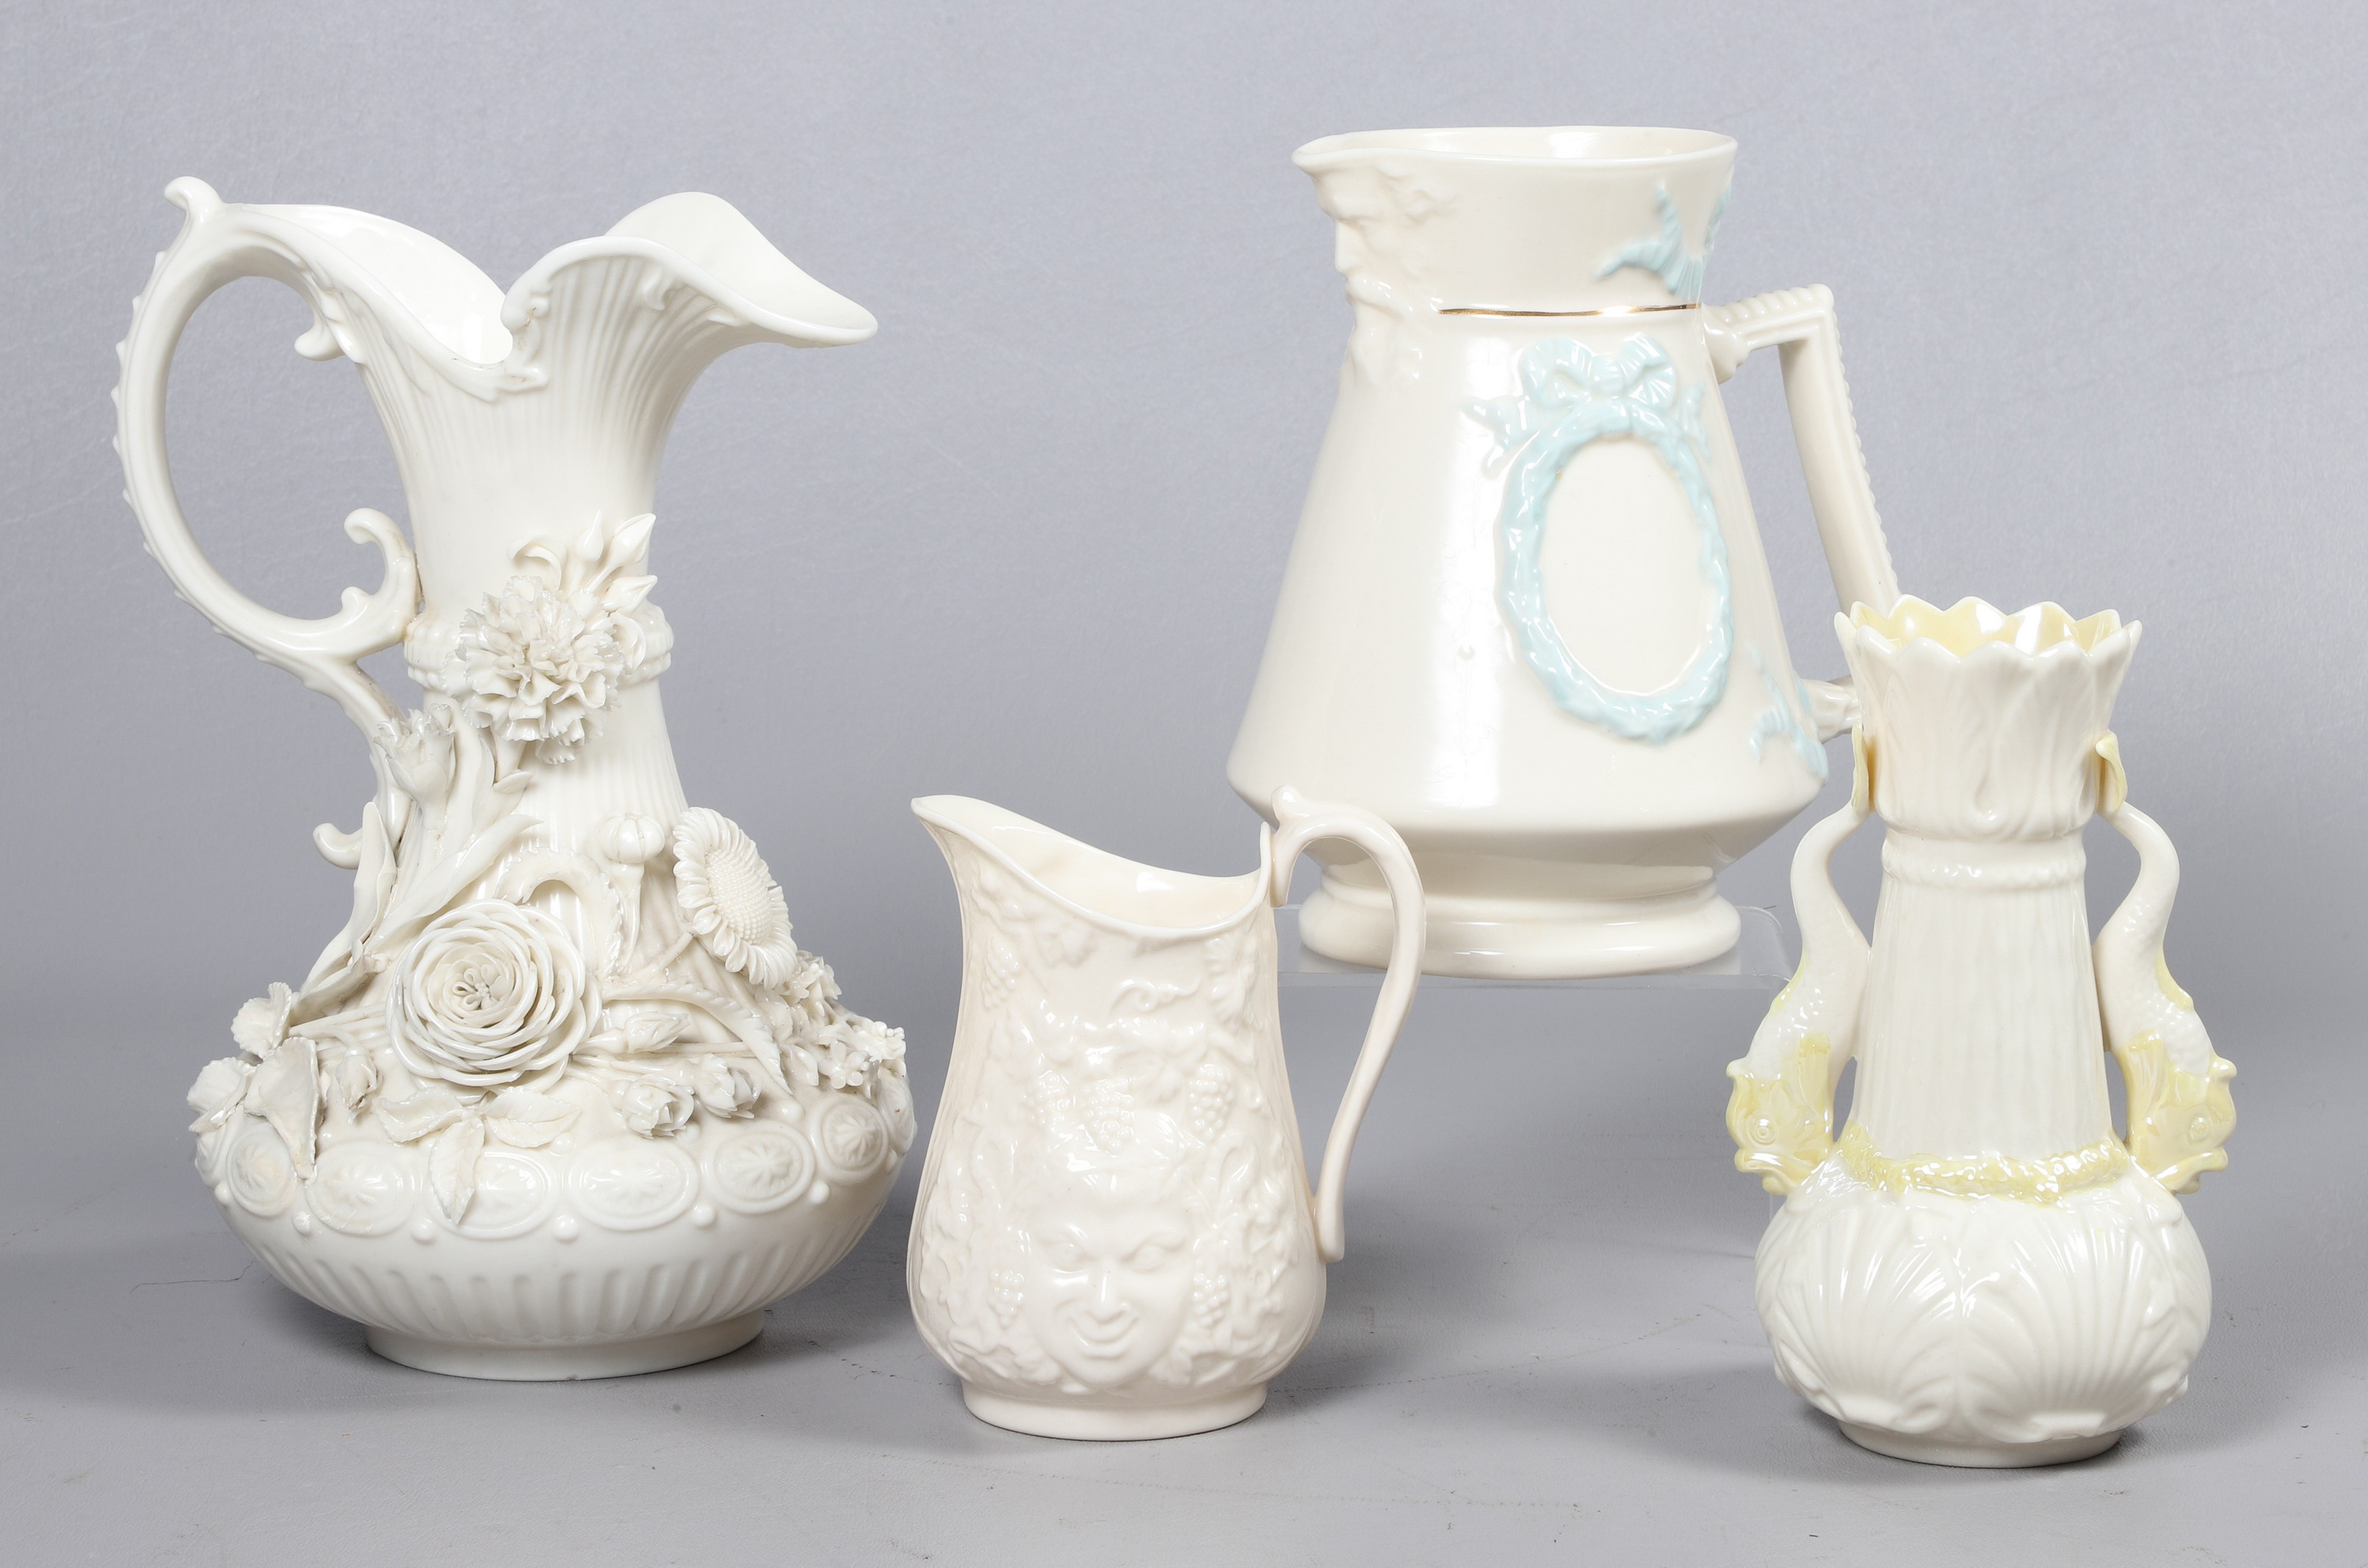  4 Belleek pitchers and vase to 2e07ce